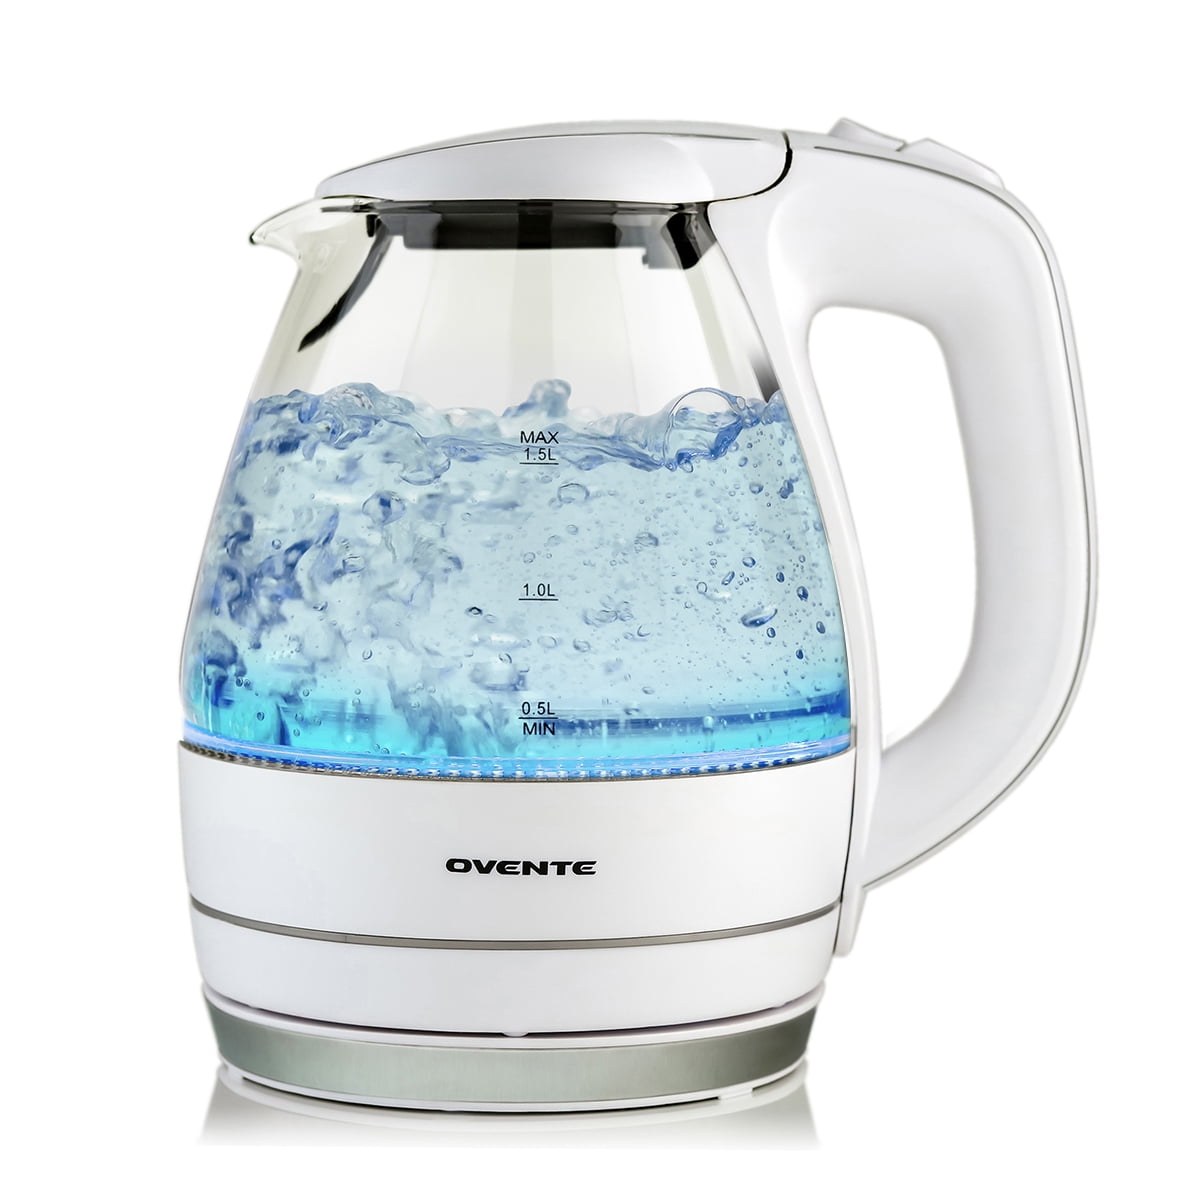  Ochine Electric Kettle Stainless Steel Tea Kettle Coffee Kettle  Cordless Hot Water Boiler Heater 1500W Fast Boil with Led Light, Auto  Shut-Off and Boil-Dry Protection (Ship from USA): Home & Kitchen